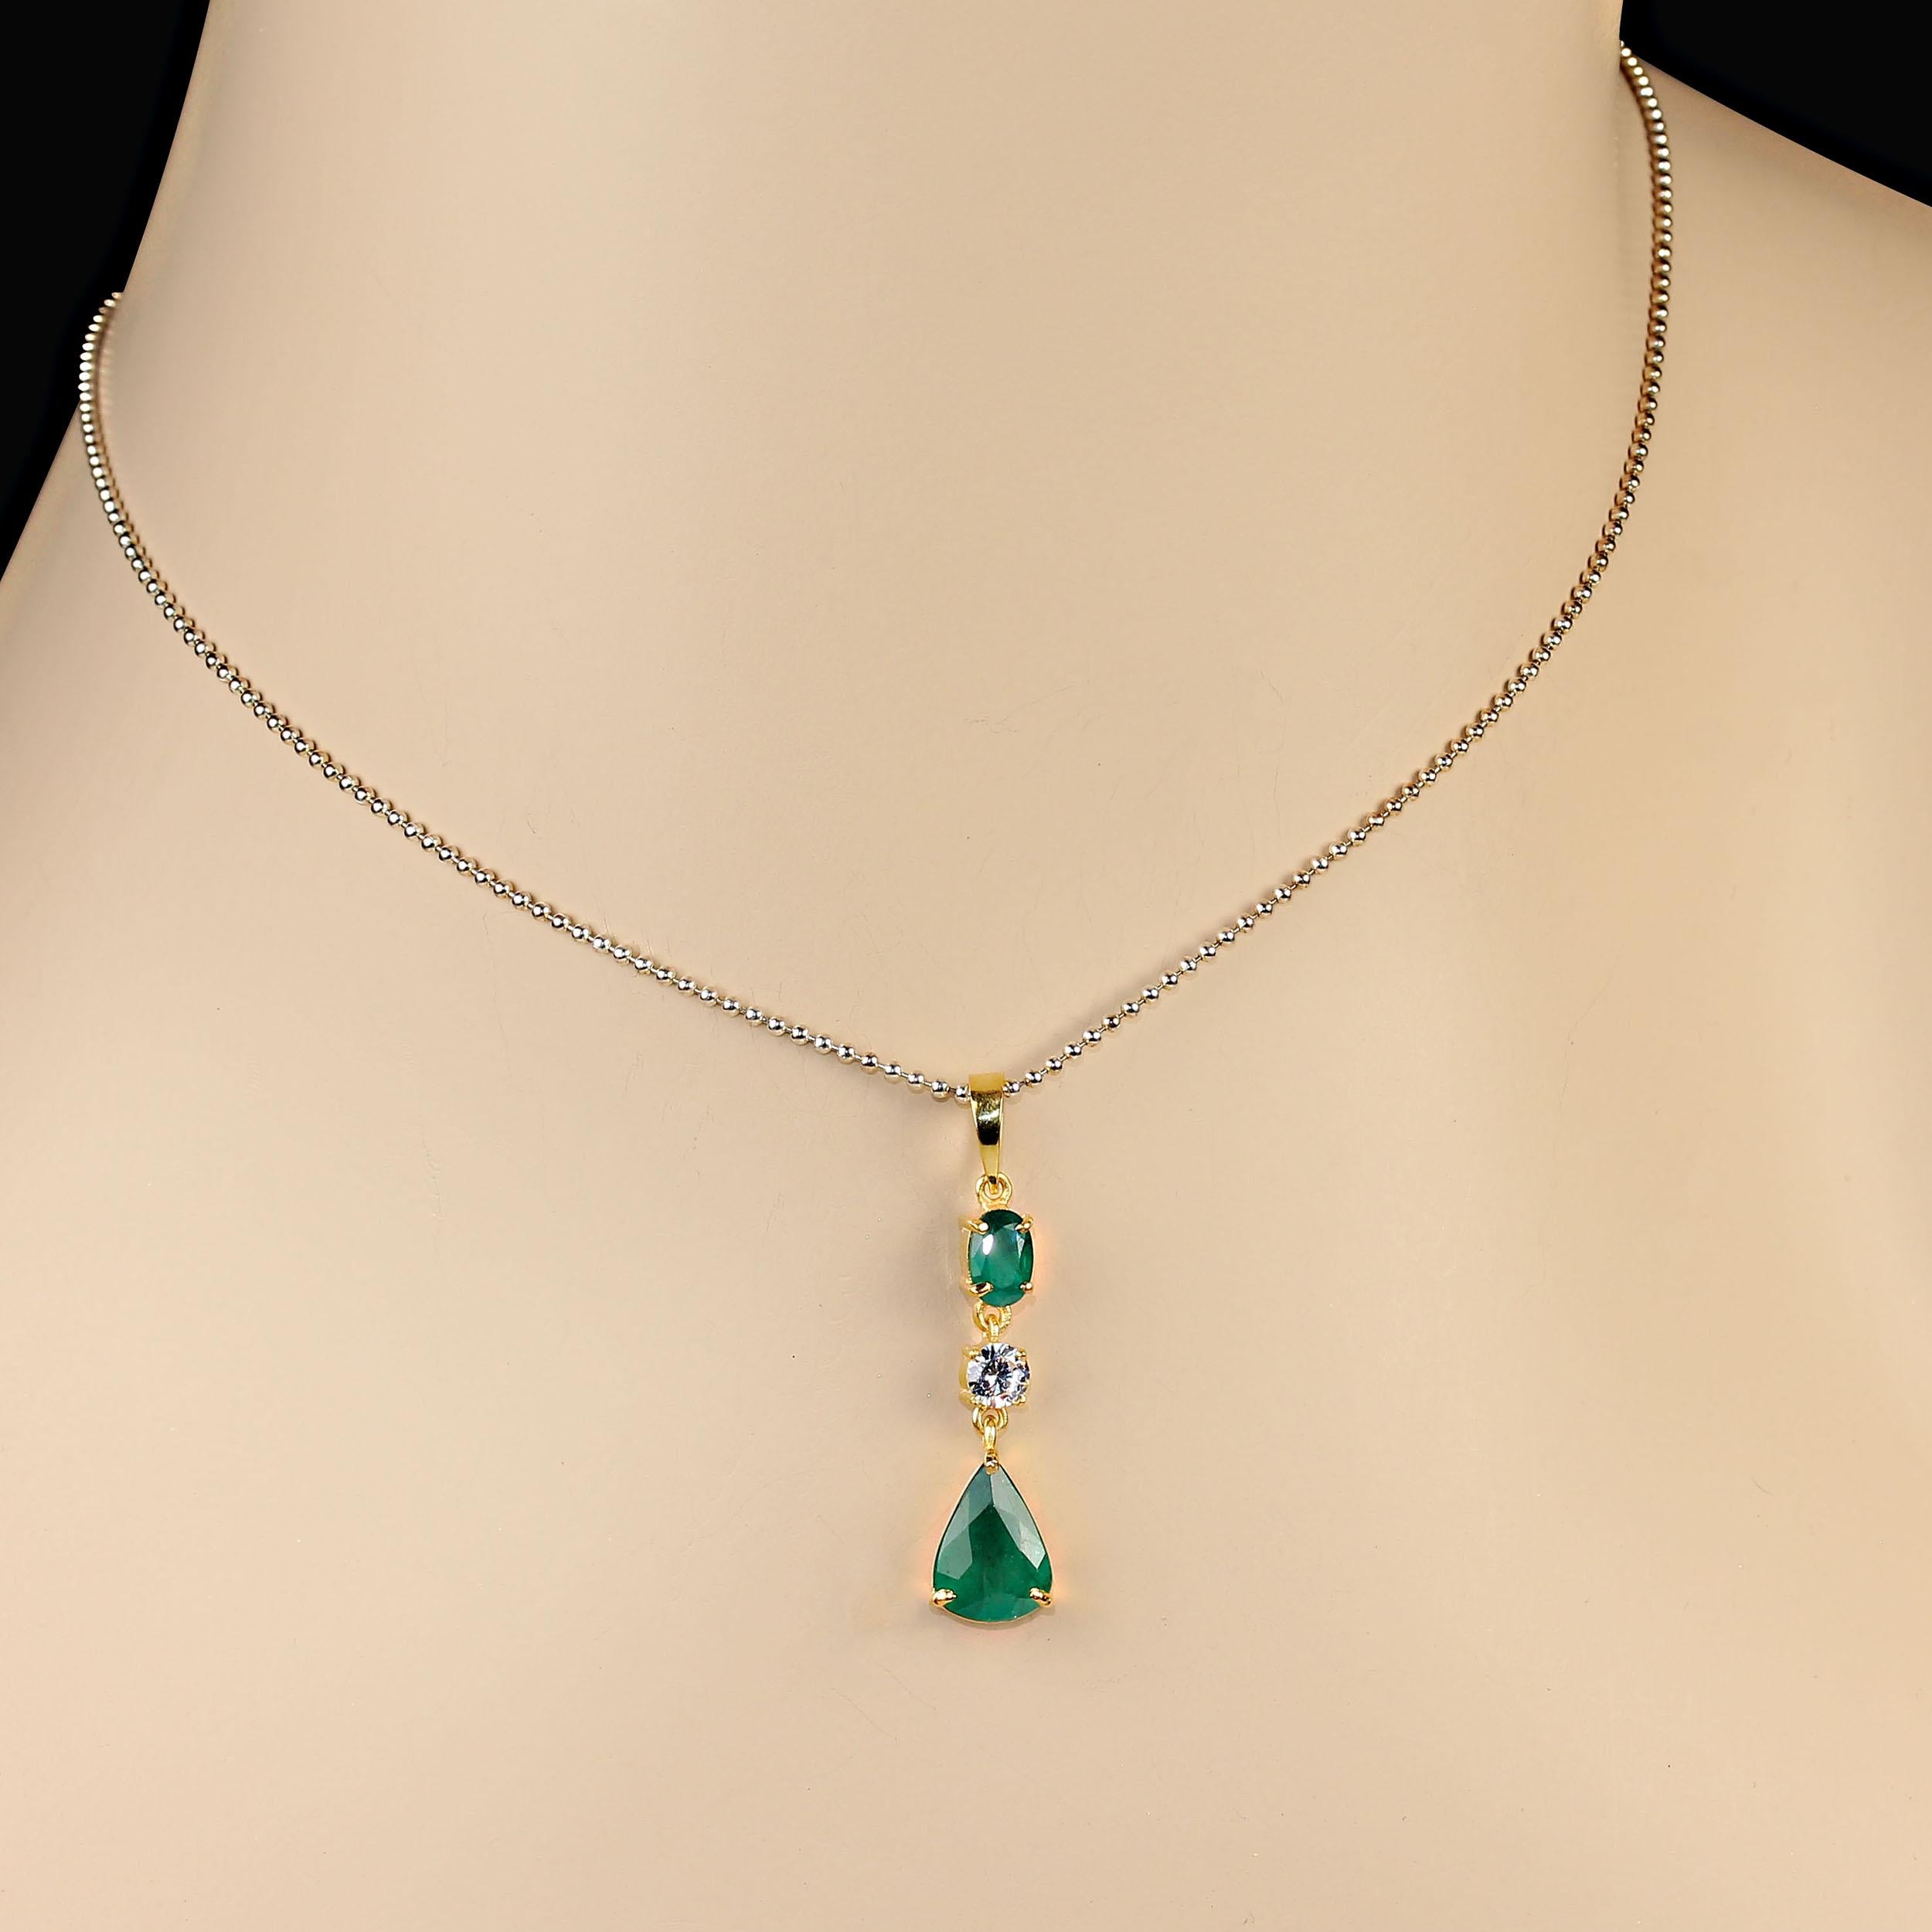 Elegant Emerald pendant features to gorgeous emeralds. Wear this beautiful 1 3/8 inch pendant with all your favorite outfits.  These emeralds total 2.01 carats and are accents with a 0.20ct genuine white zircon.  These emeralds are a lovely deep